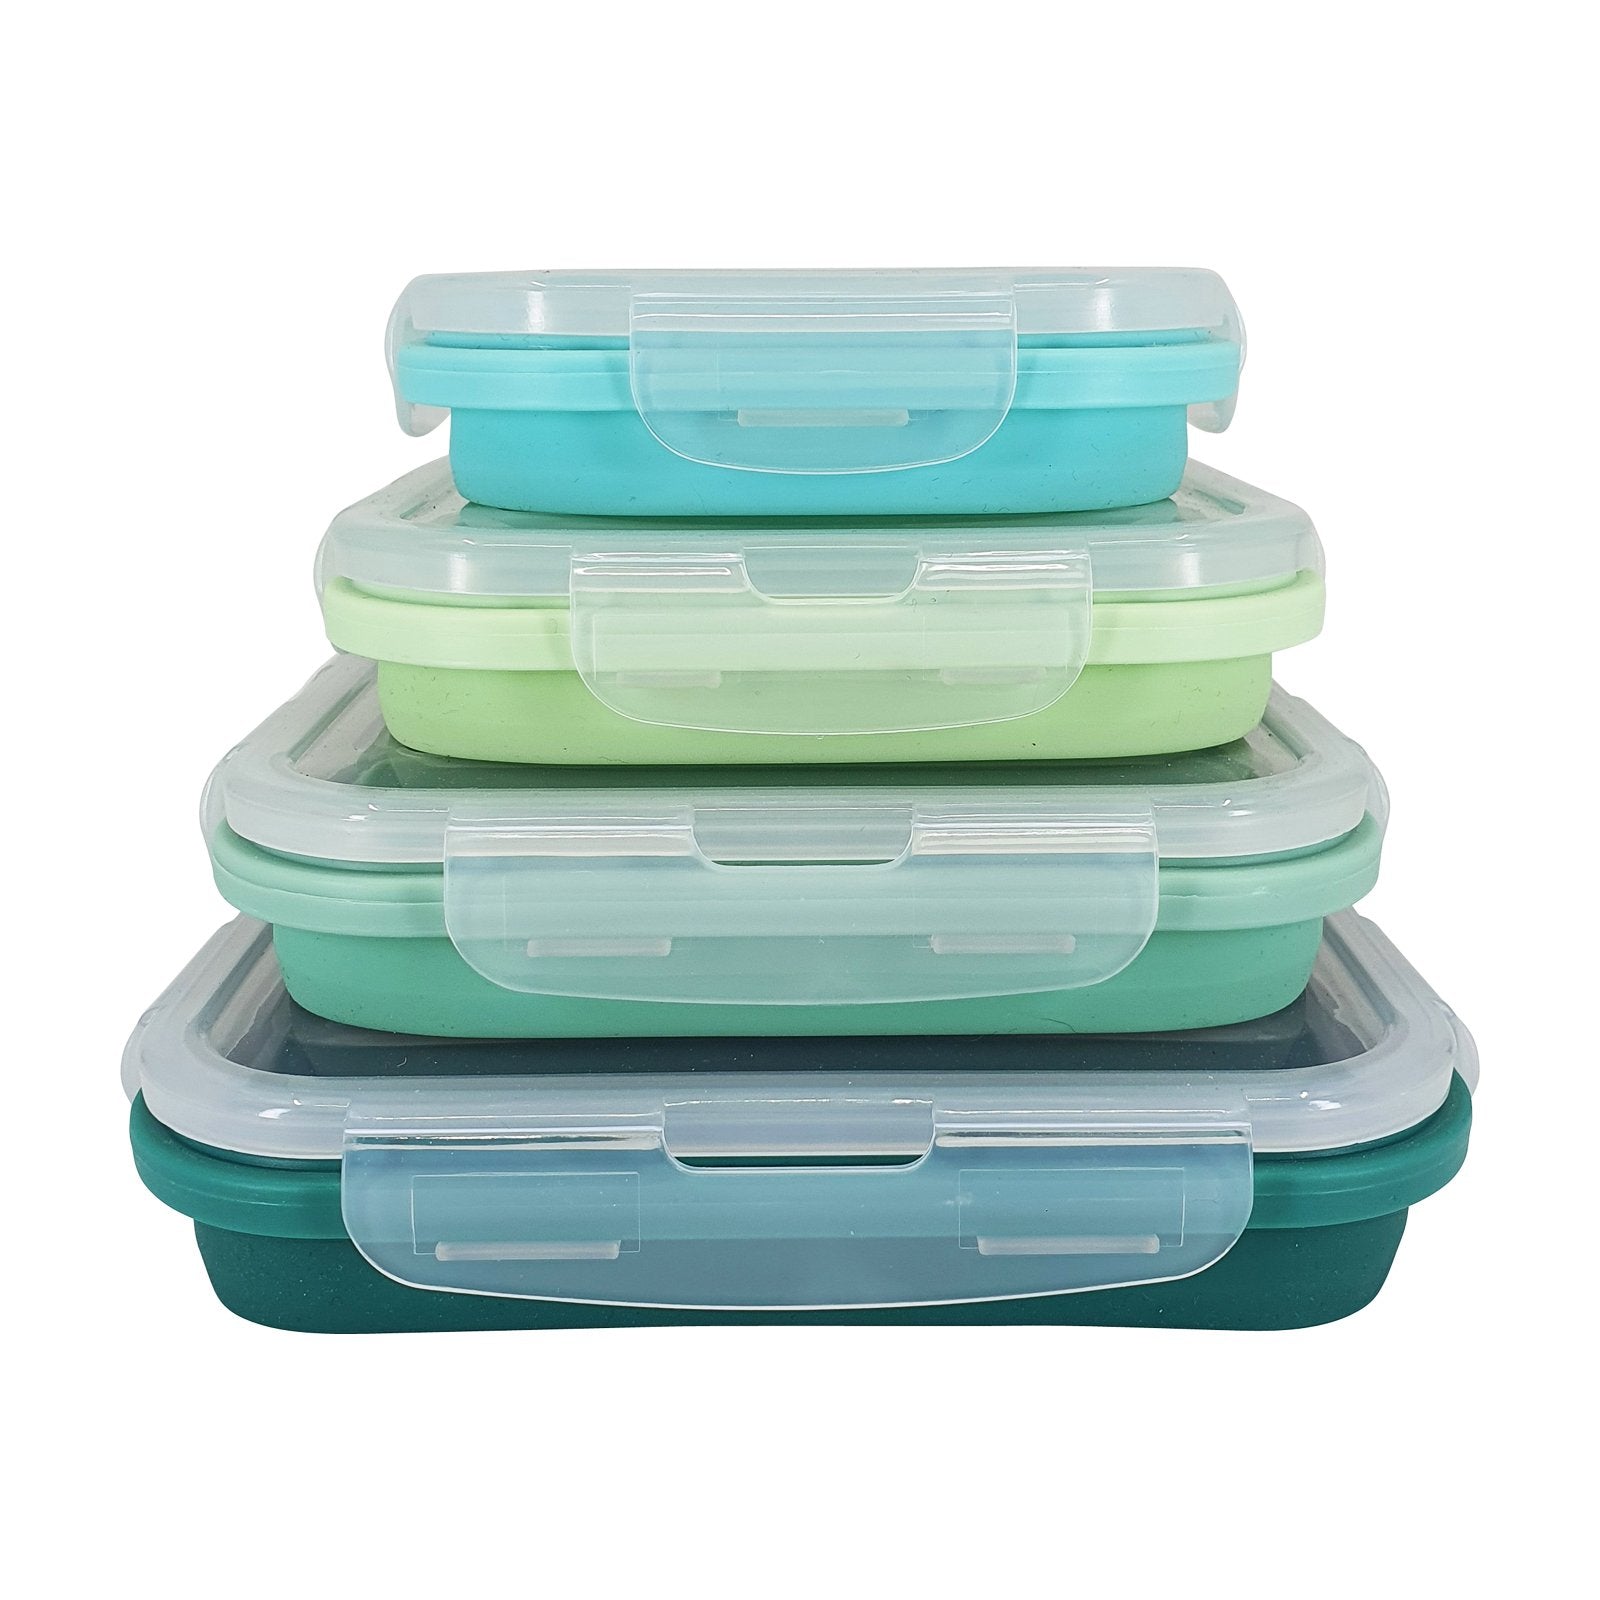 1pc Reusable Meal Prep Container Snack Box, 4 Grids Stackable